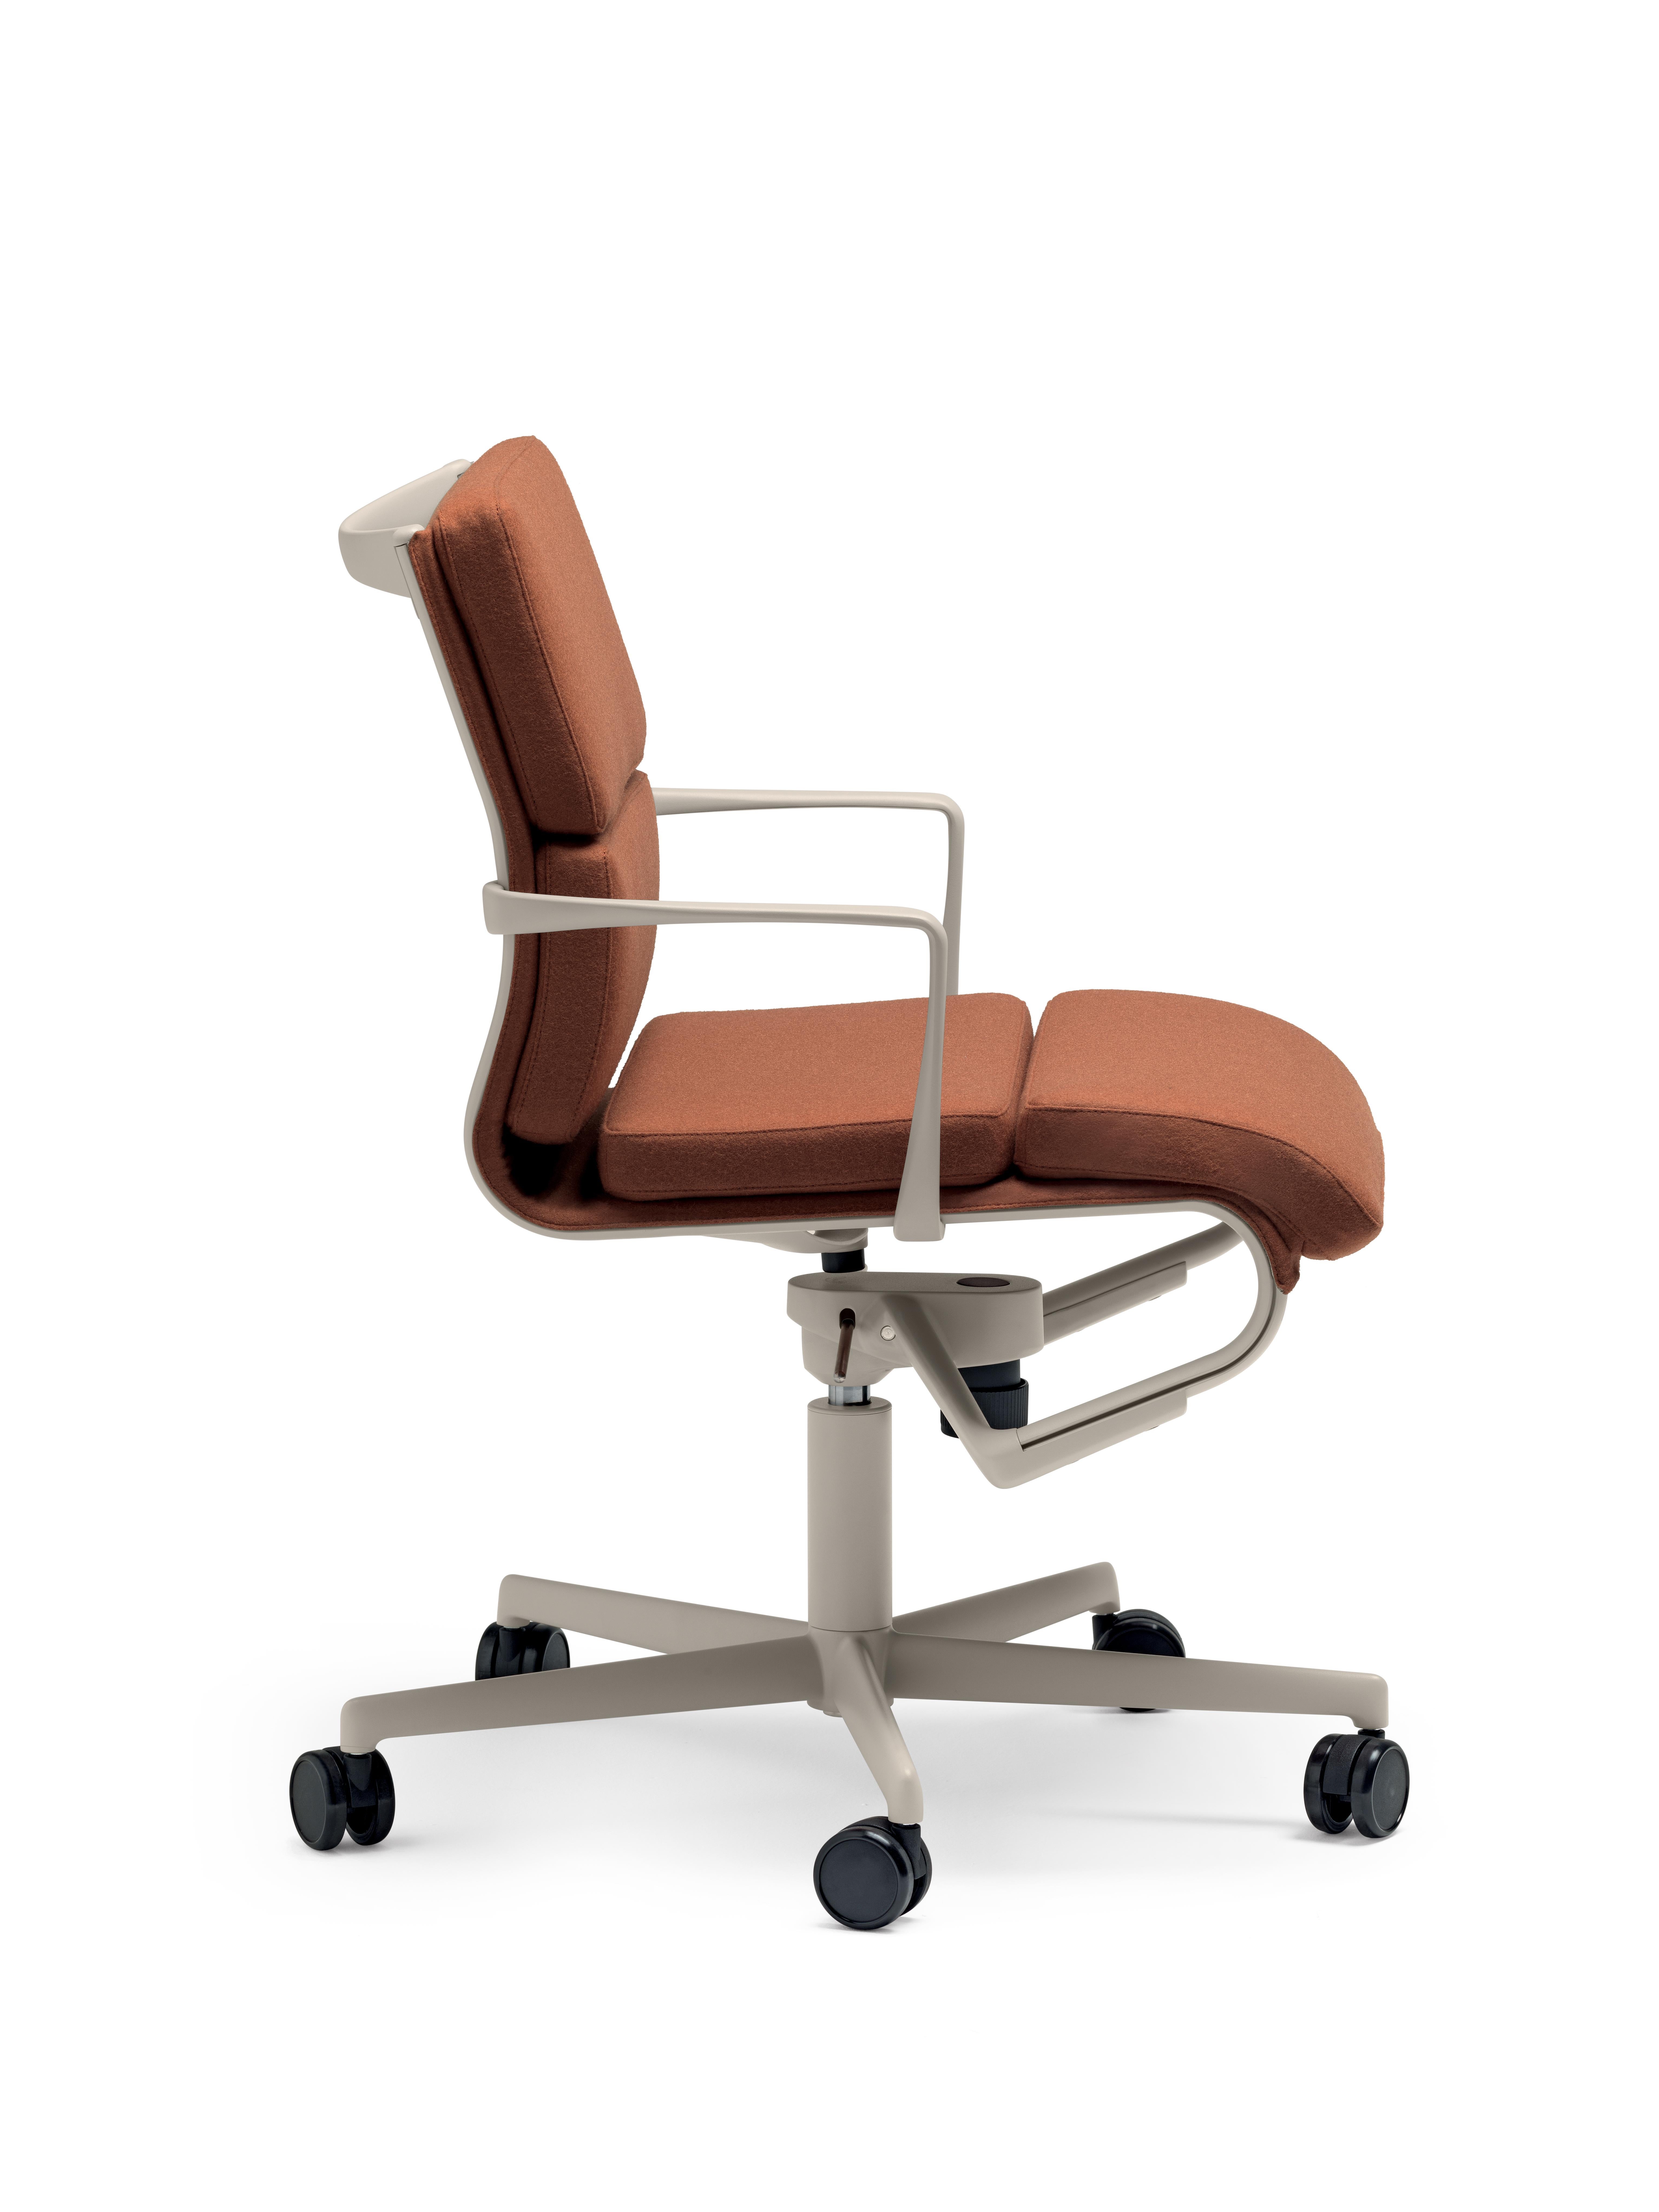 Alias Rollingframe Chair 52 Soft in Brown Upholstery with Sand Aluminium Frame by Alberto Meda

Height adjustable chair with arms, with soft (or hard ***) breaking castors and 5-star swivel base with tilting mechanism. Structure made of extruded